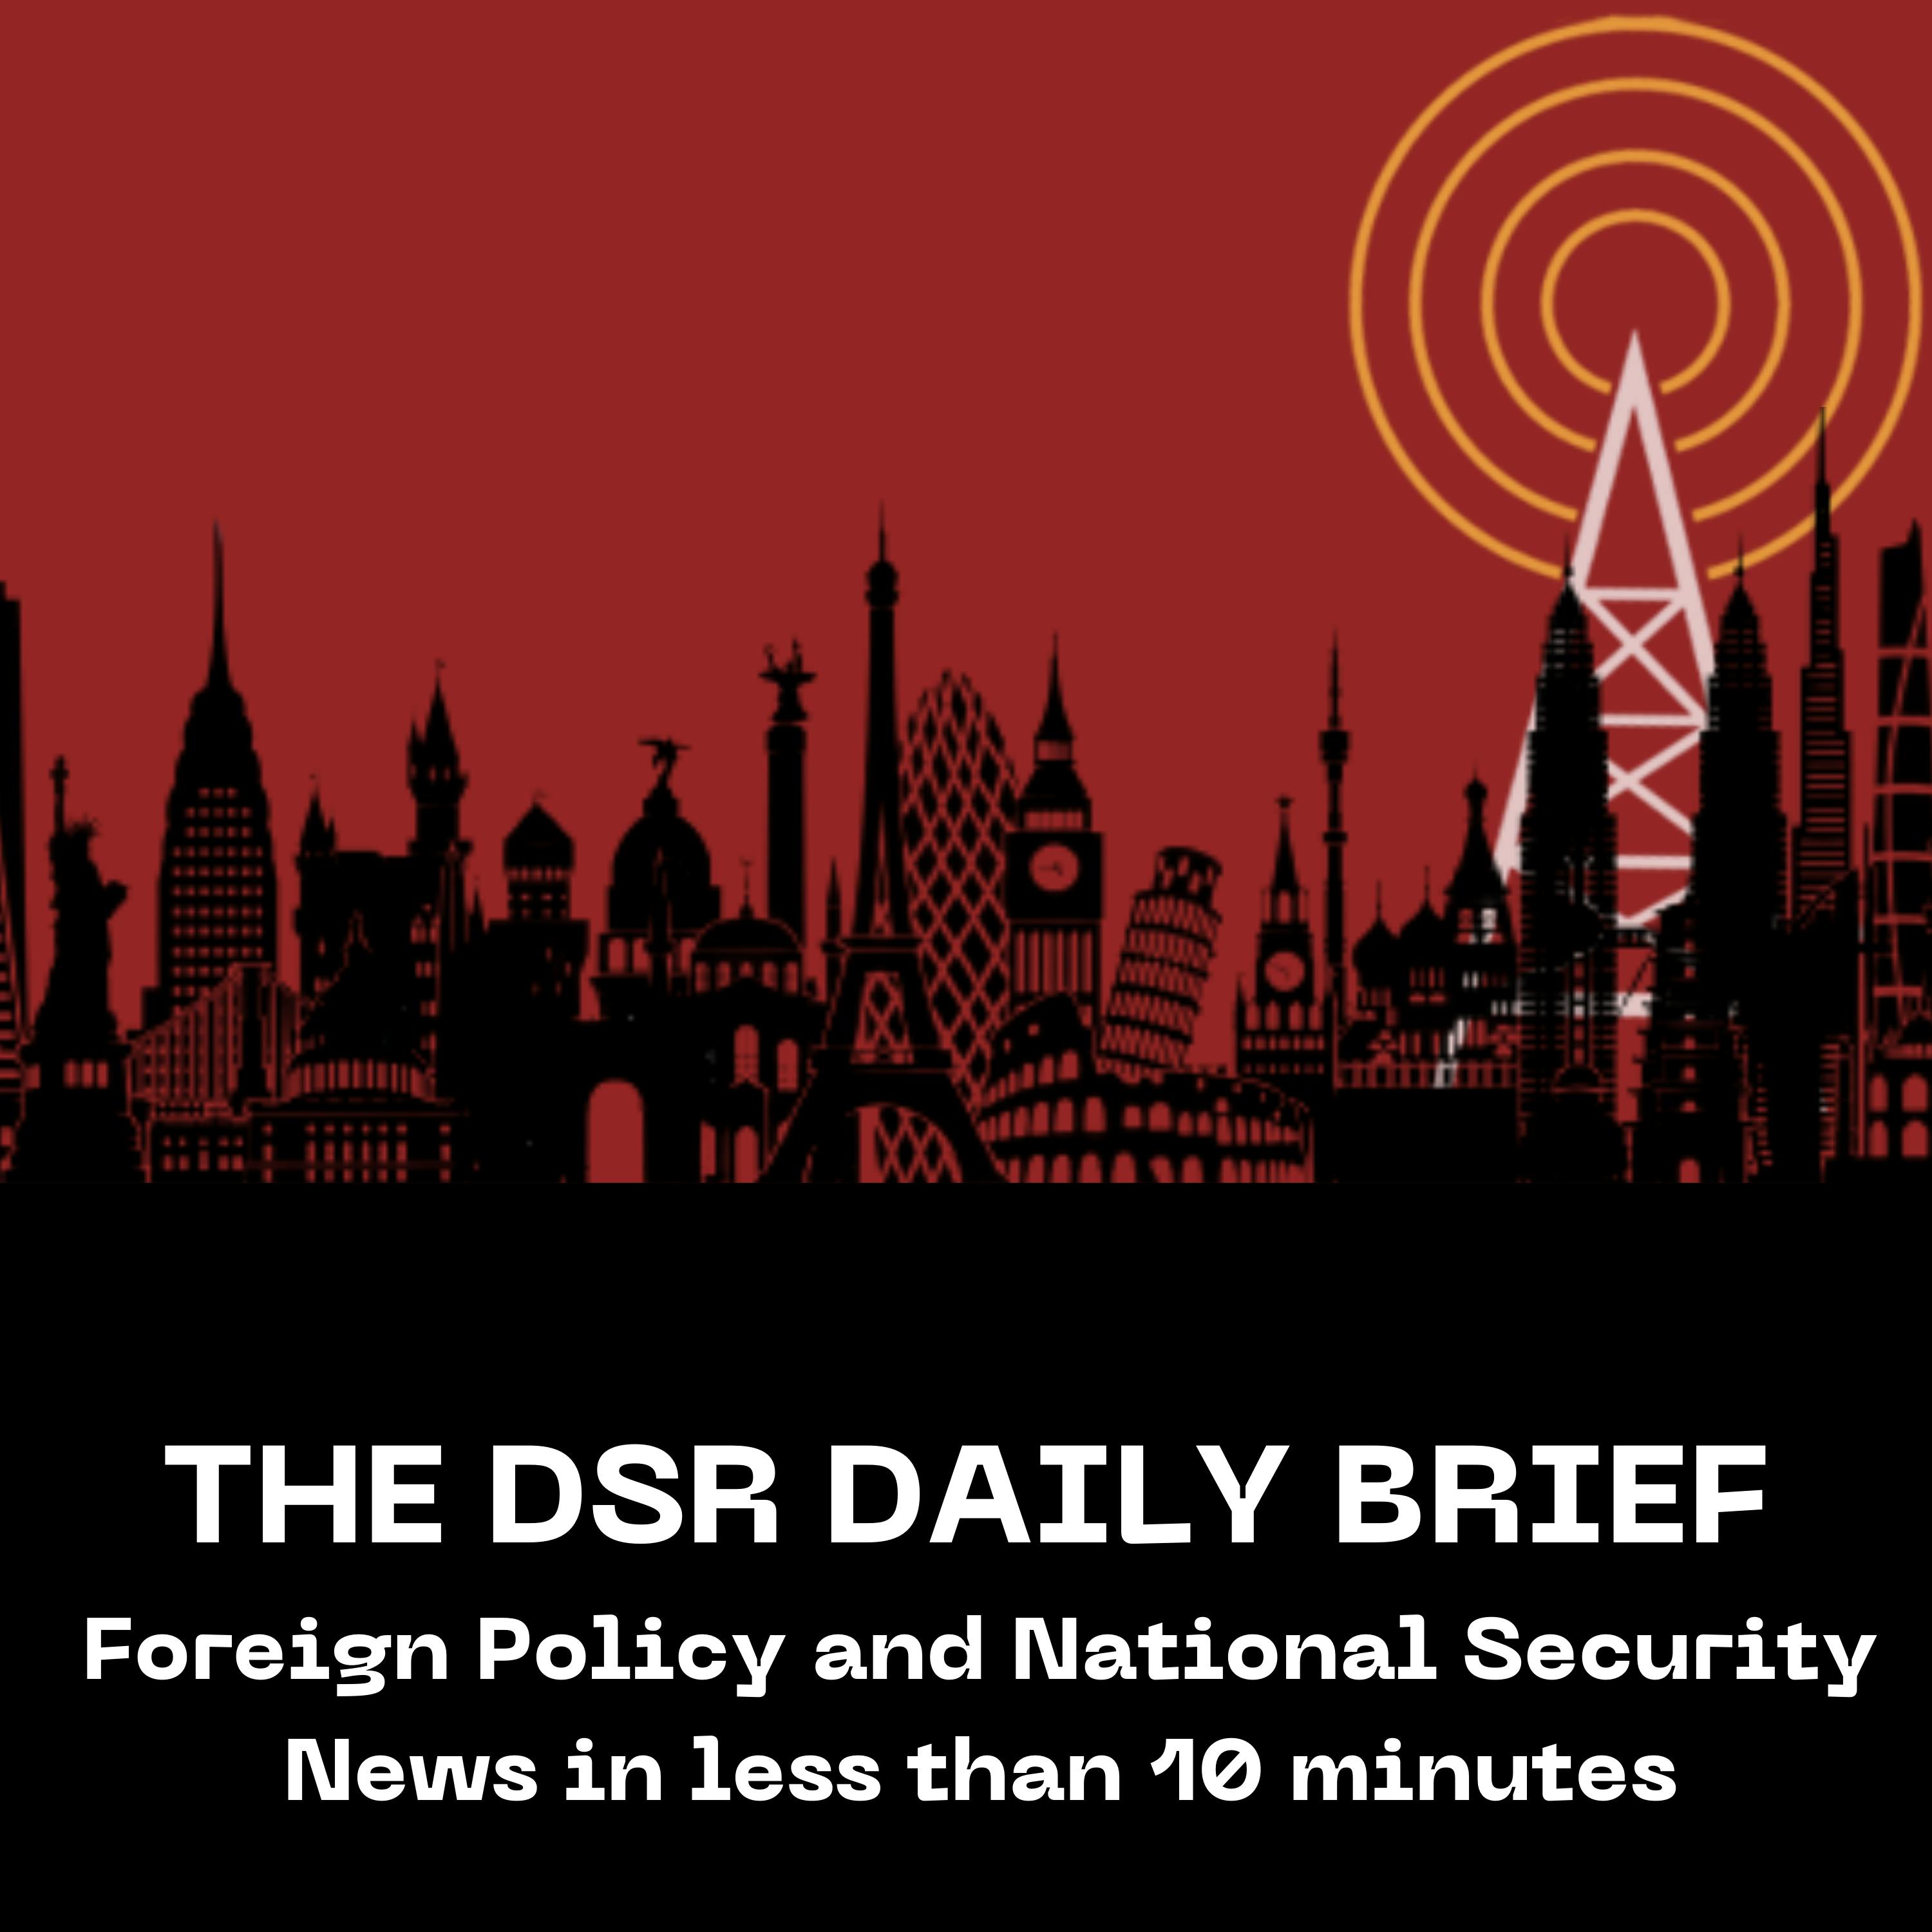 The DSR Daily for November 16: Biden and Xi Meet in California, Senate Approves Continuing Resolution